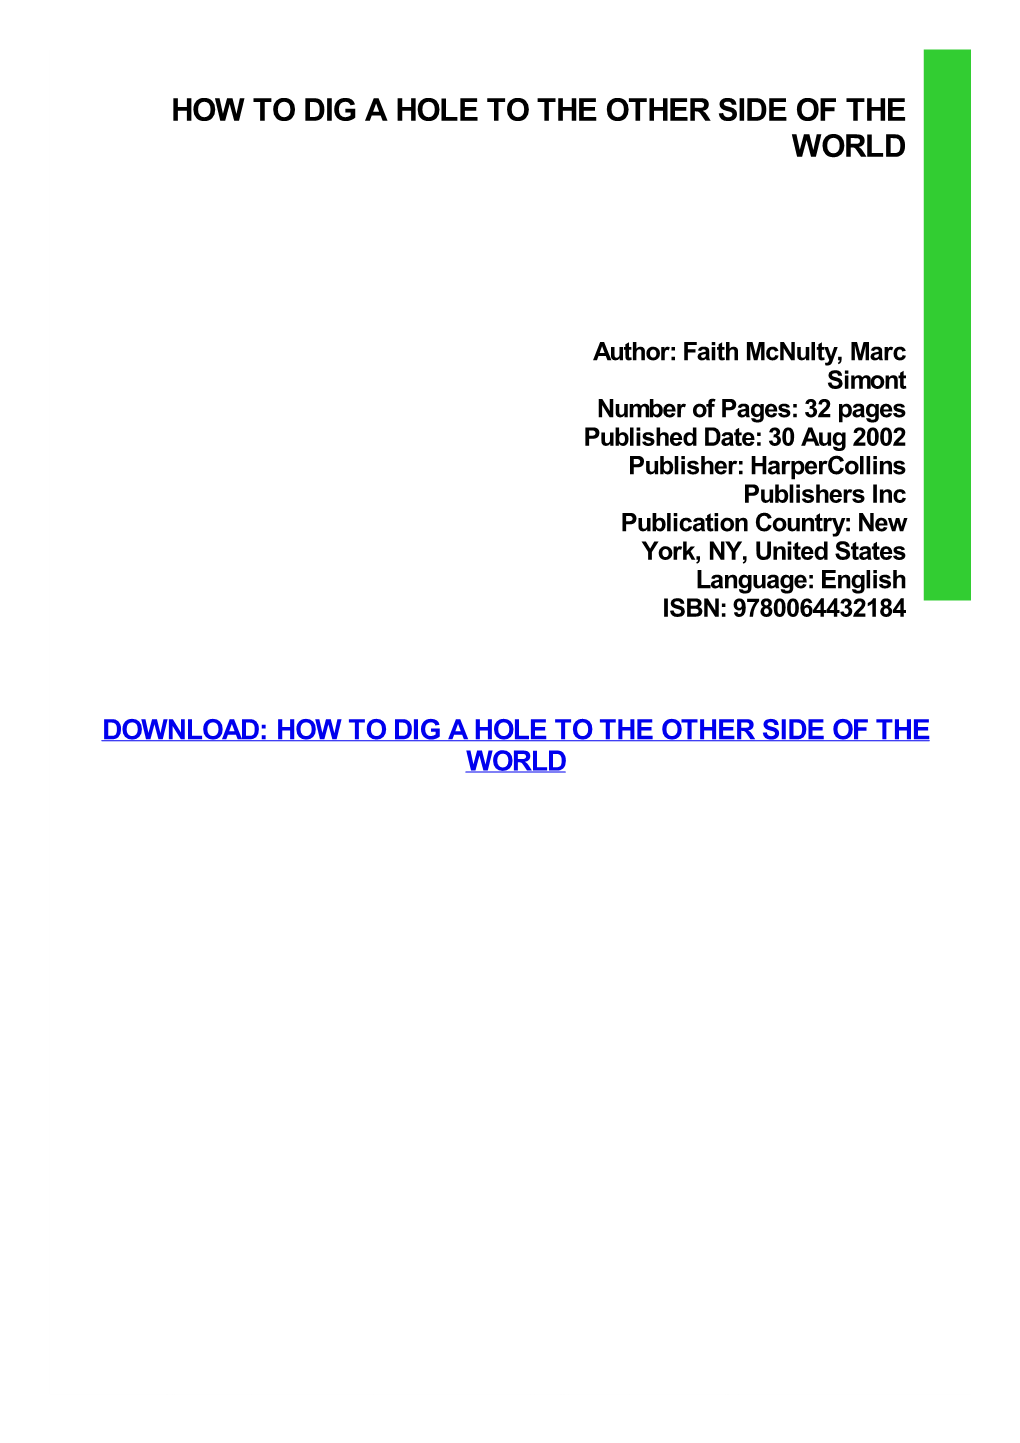 How to Dig a Hole to the Other Side of the World Download Free